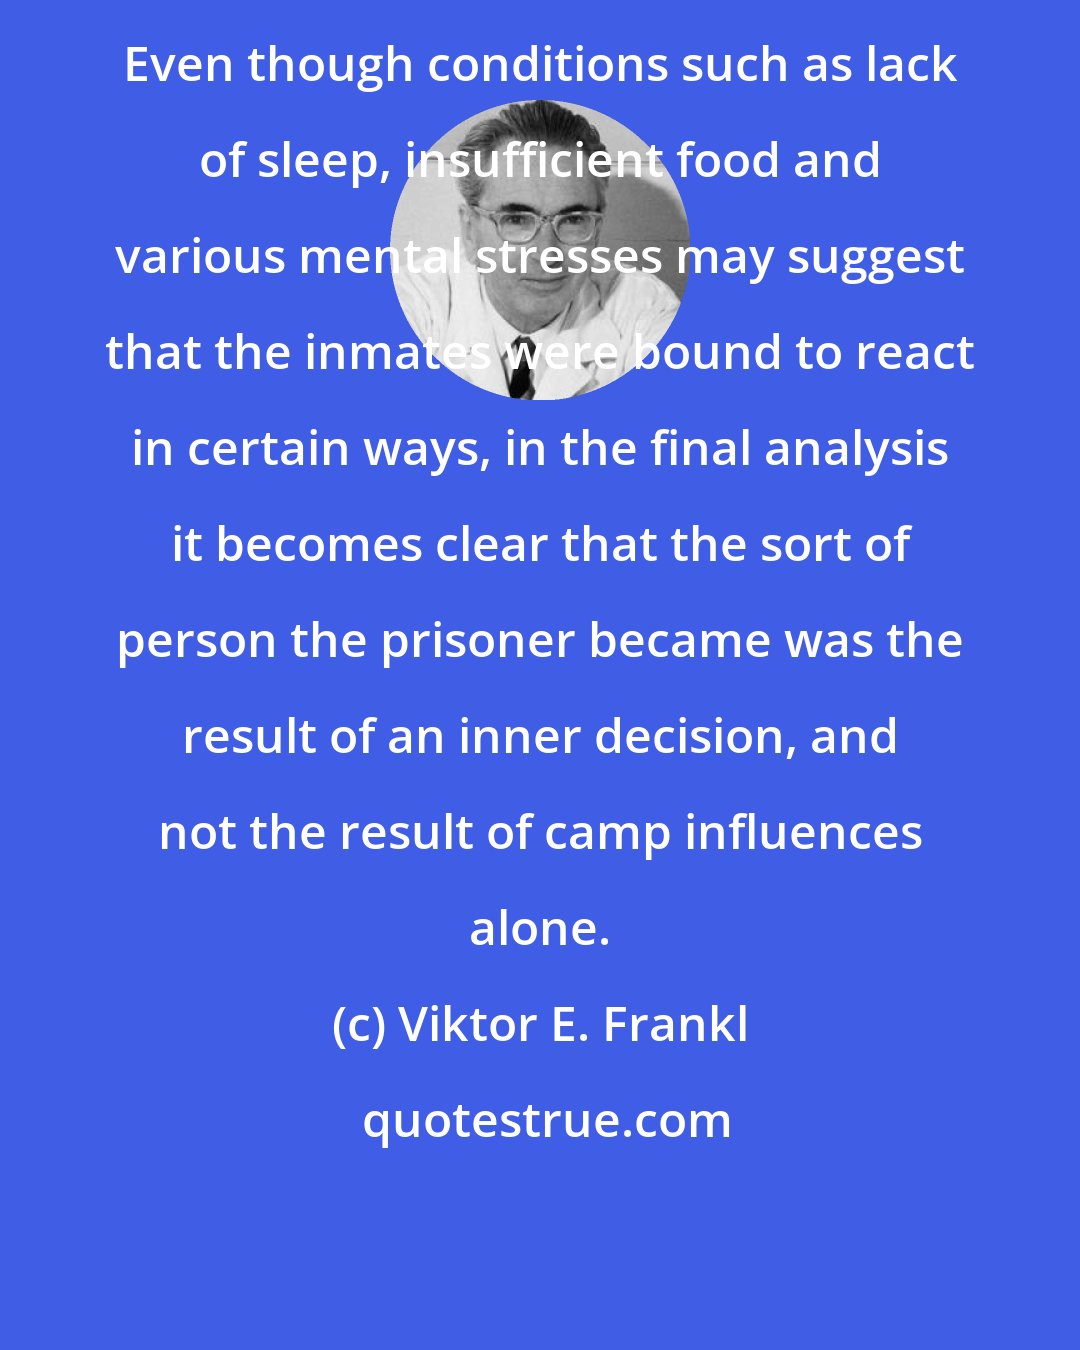 Viktor E. Frankl: Even though conditions such as lack of sleep, insufficient food and various mental stresses may suggest that the inmates were bound to react in certain ways, in the final analysis it becomes clear that the sort of person the prisoner became was the result of an inner decision, and not the result of camp influences alone.